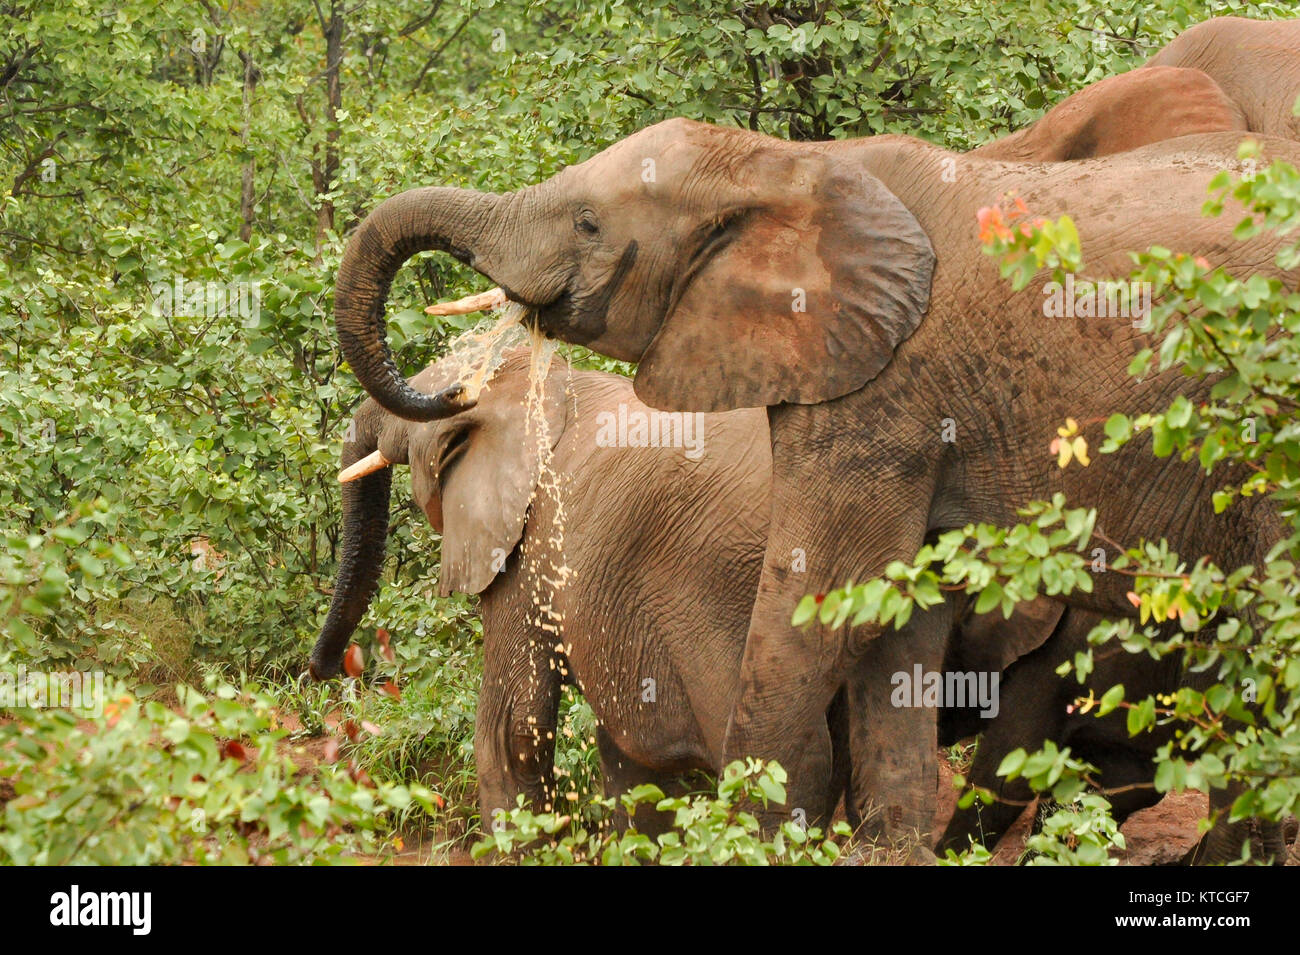 Elephant herd at natural waterhole drinking and scratching bodies in mud Stock Photo